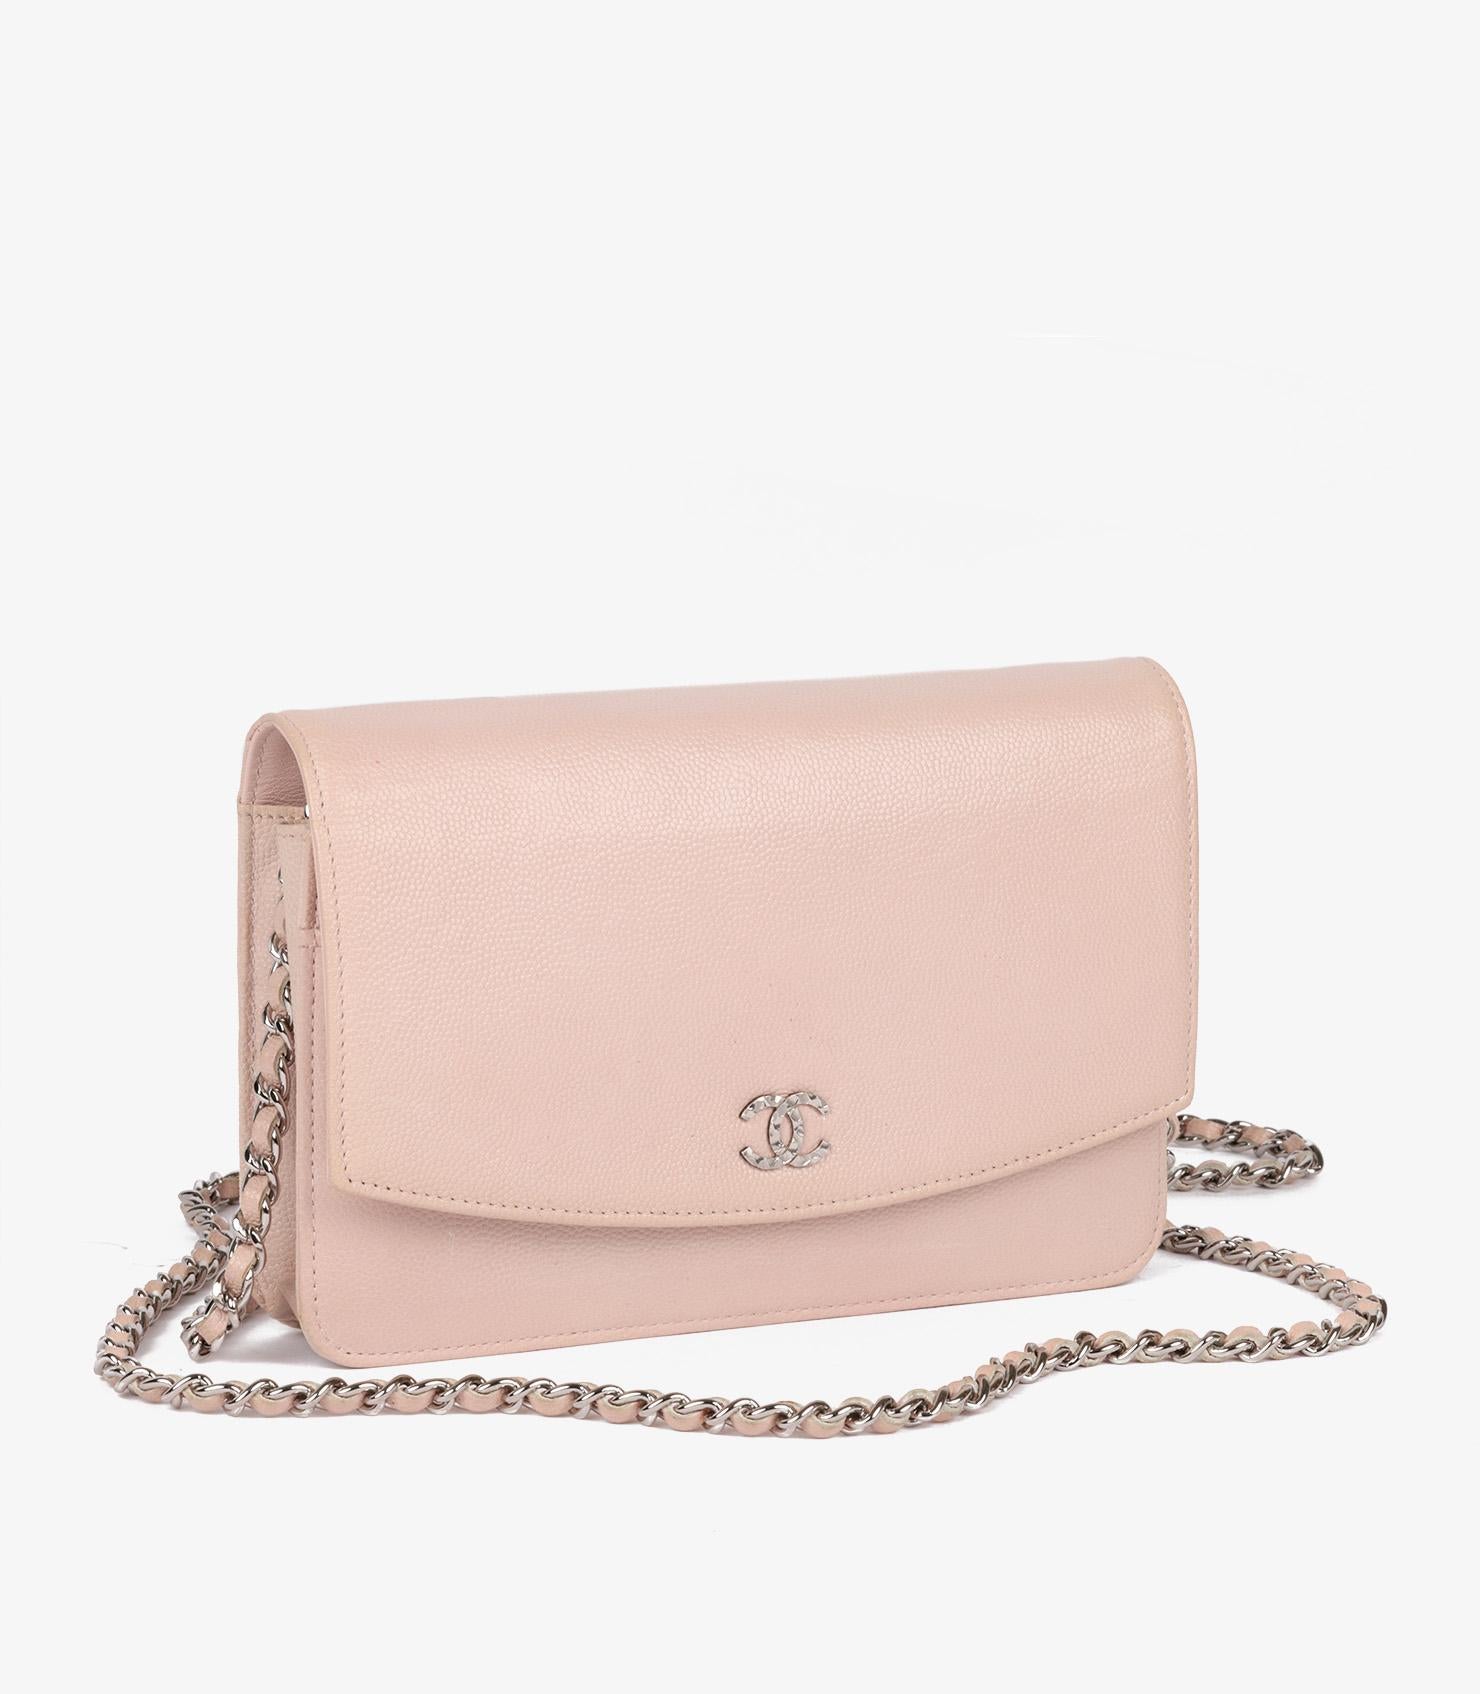 Chanel Blush Caviar Leather Wallet-On-Chain WOC In Excellent Condition For Sale In Bishop's Stortford, Hertfordshire